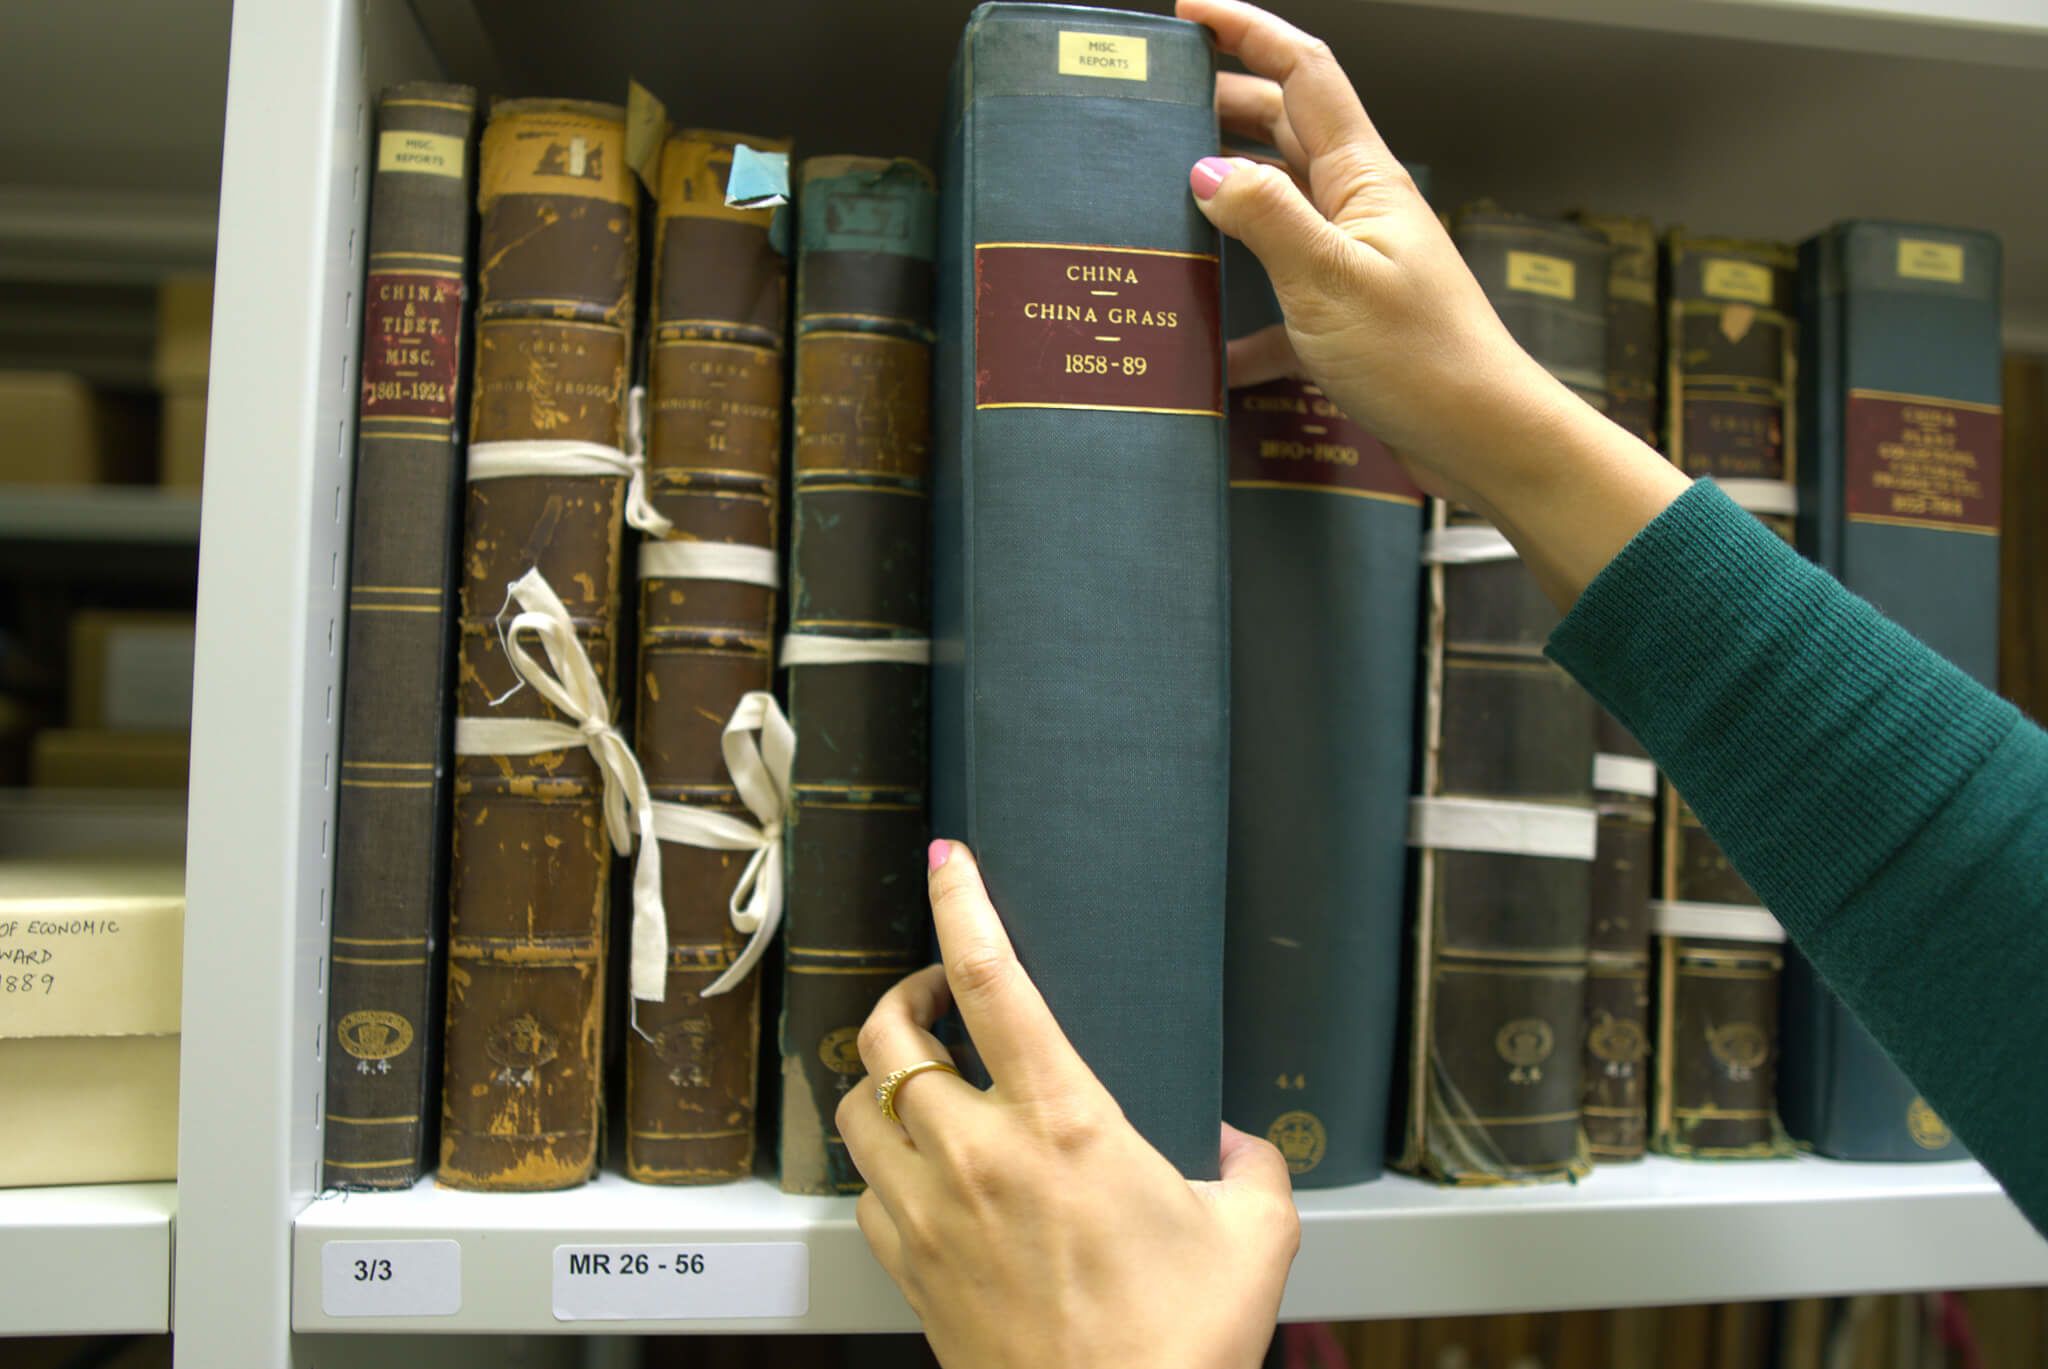 This image shows the archival bound volumes of the Miscellaneous Reports: China on a shelf in the Archive at the Royal Botanical Gardens, Kew. It includes Anushka Tay’s hands. 